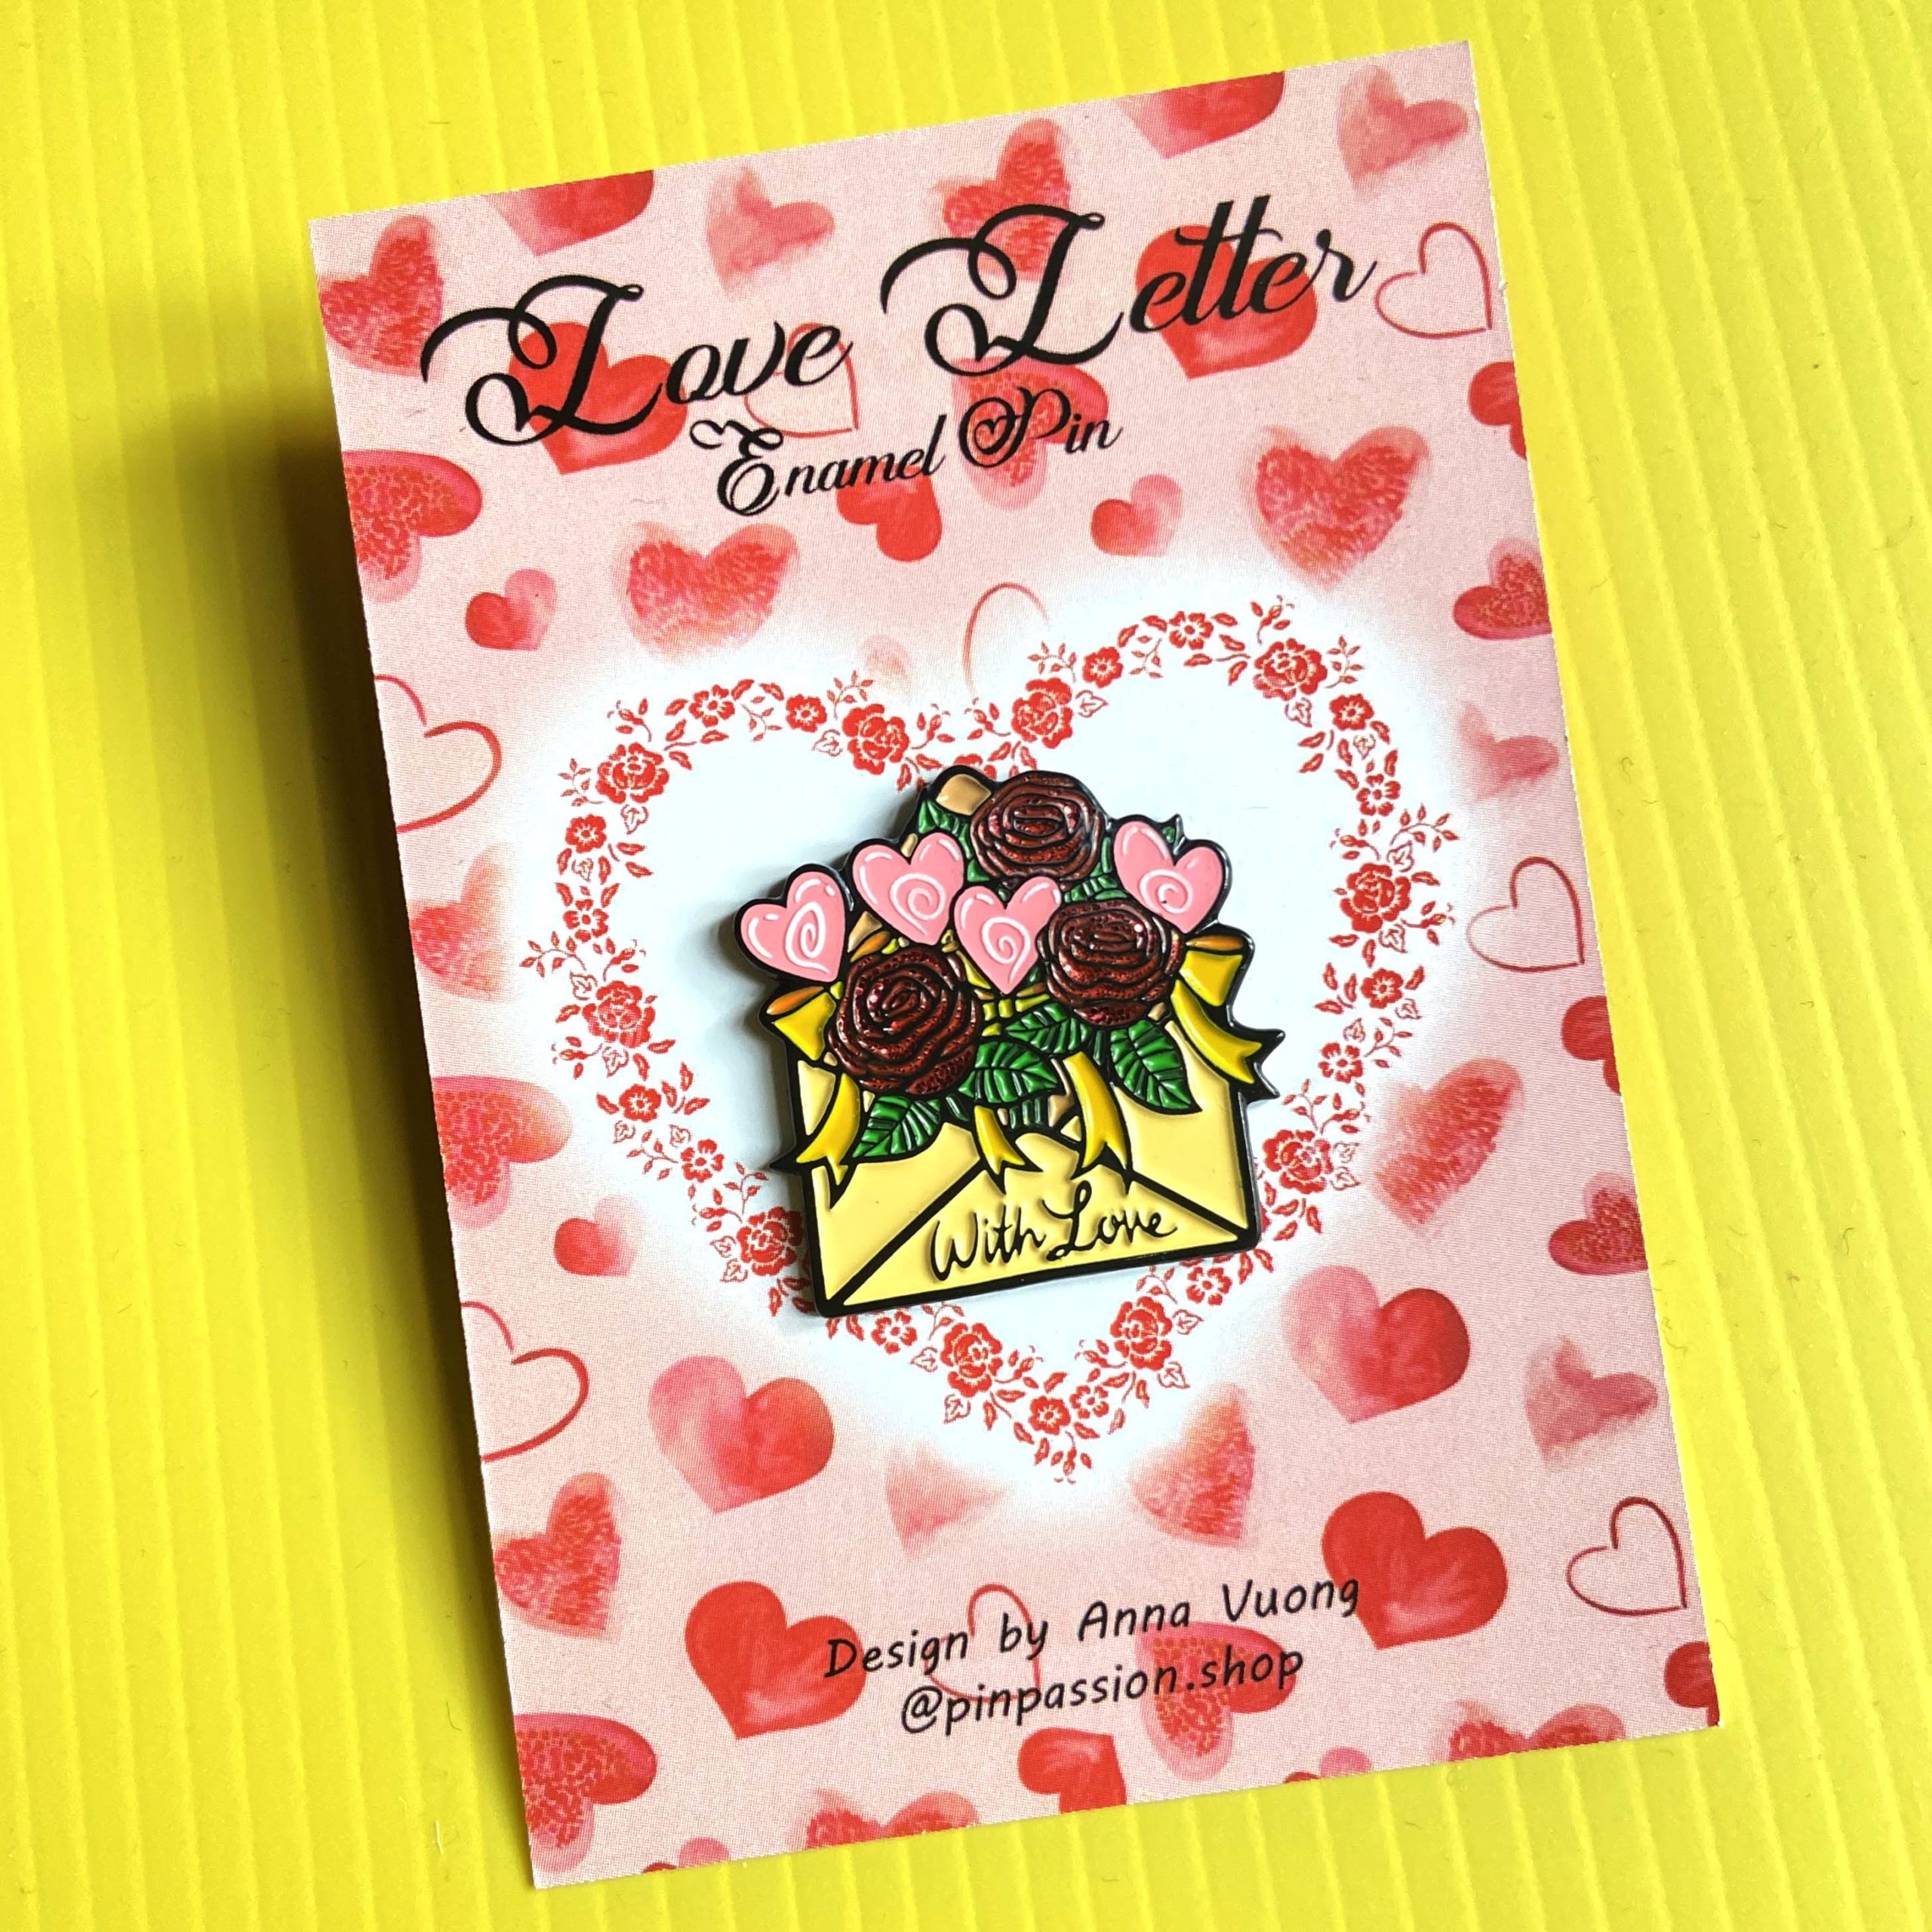 https://pinpassion.shop/wp-content/uploads/2022/05/love-letter-pin-scaled.jpg